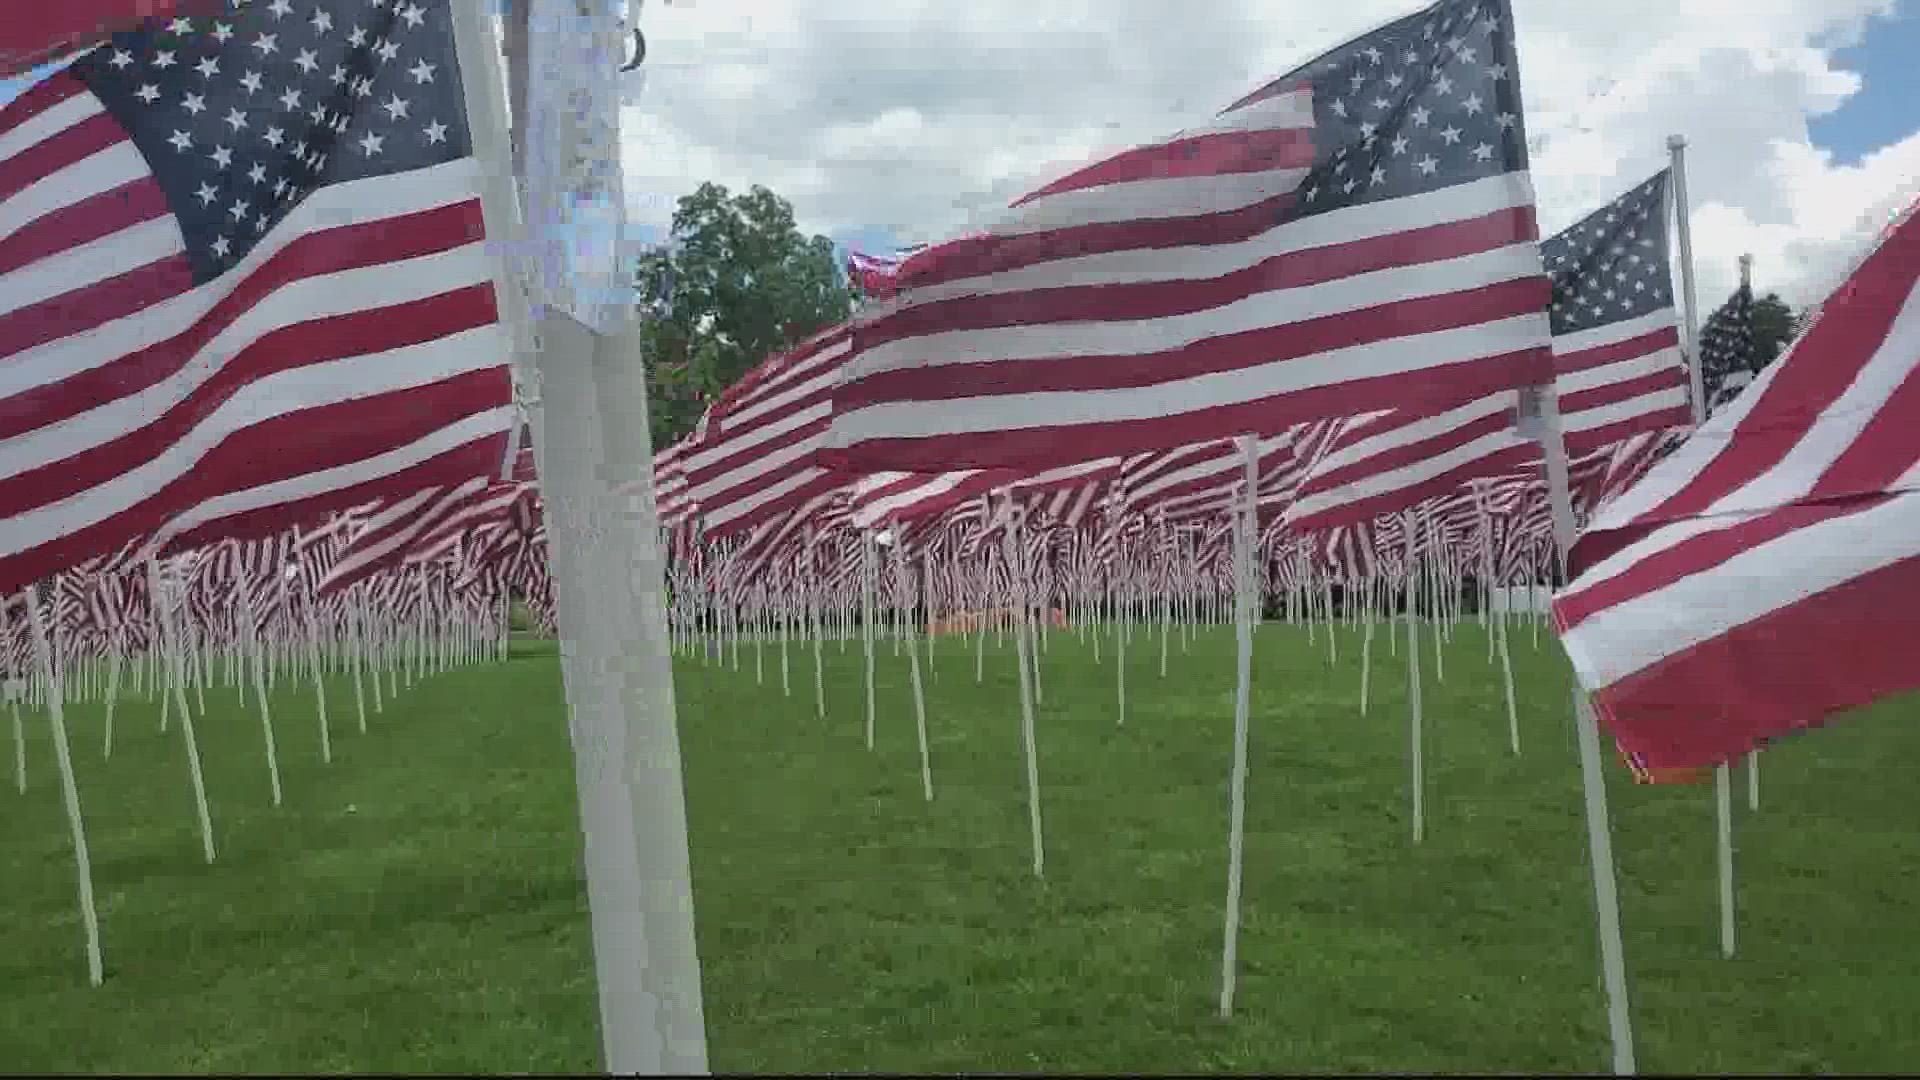 The flags are laid out for Memorial Day as the tradition organized by the Rotary Club of Montgomery Village. Every flag has a name of a person who died for USA.